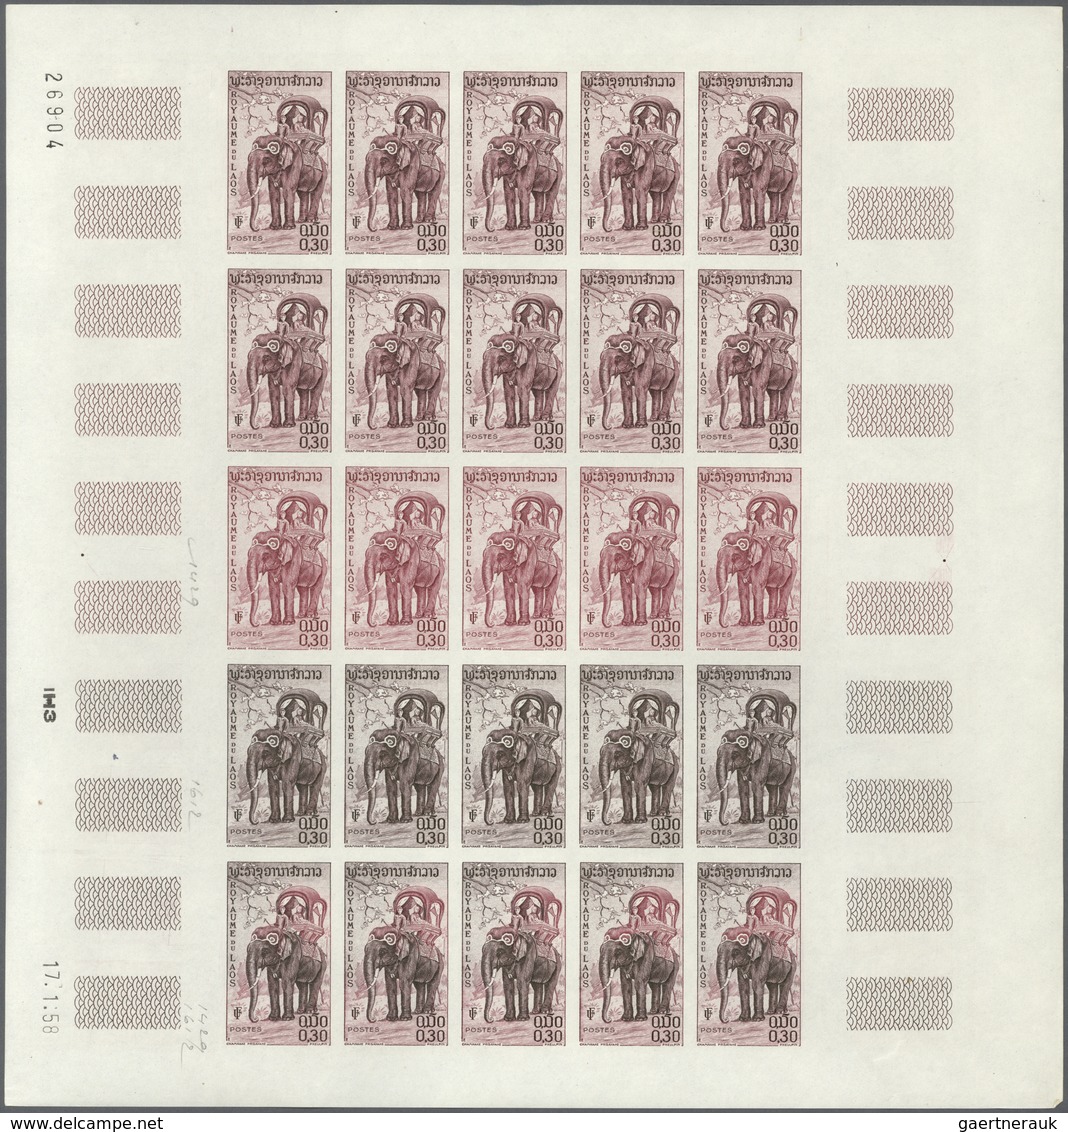 Laos: 1958. Complete set (7 values) in 7 color proof sheets of 25 showing various ELEPHANTS. Each sh